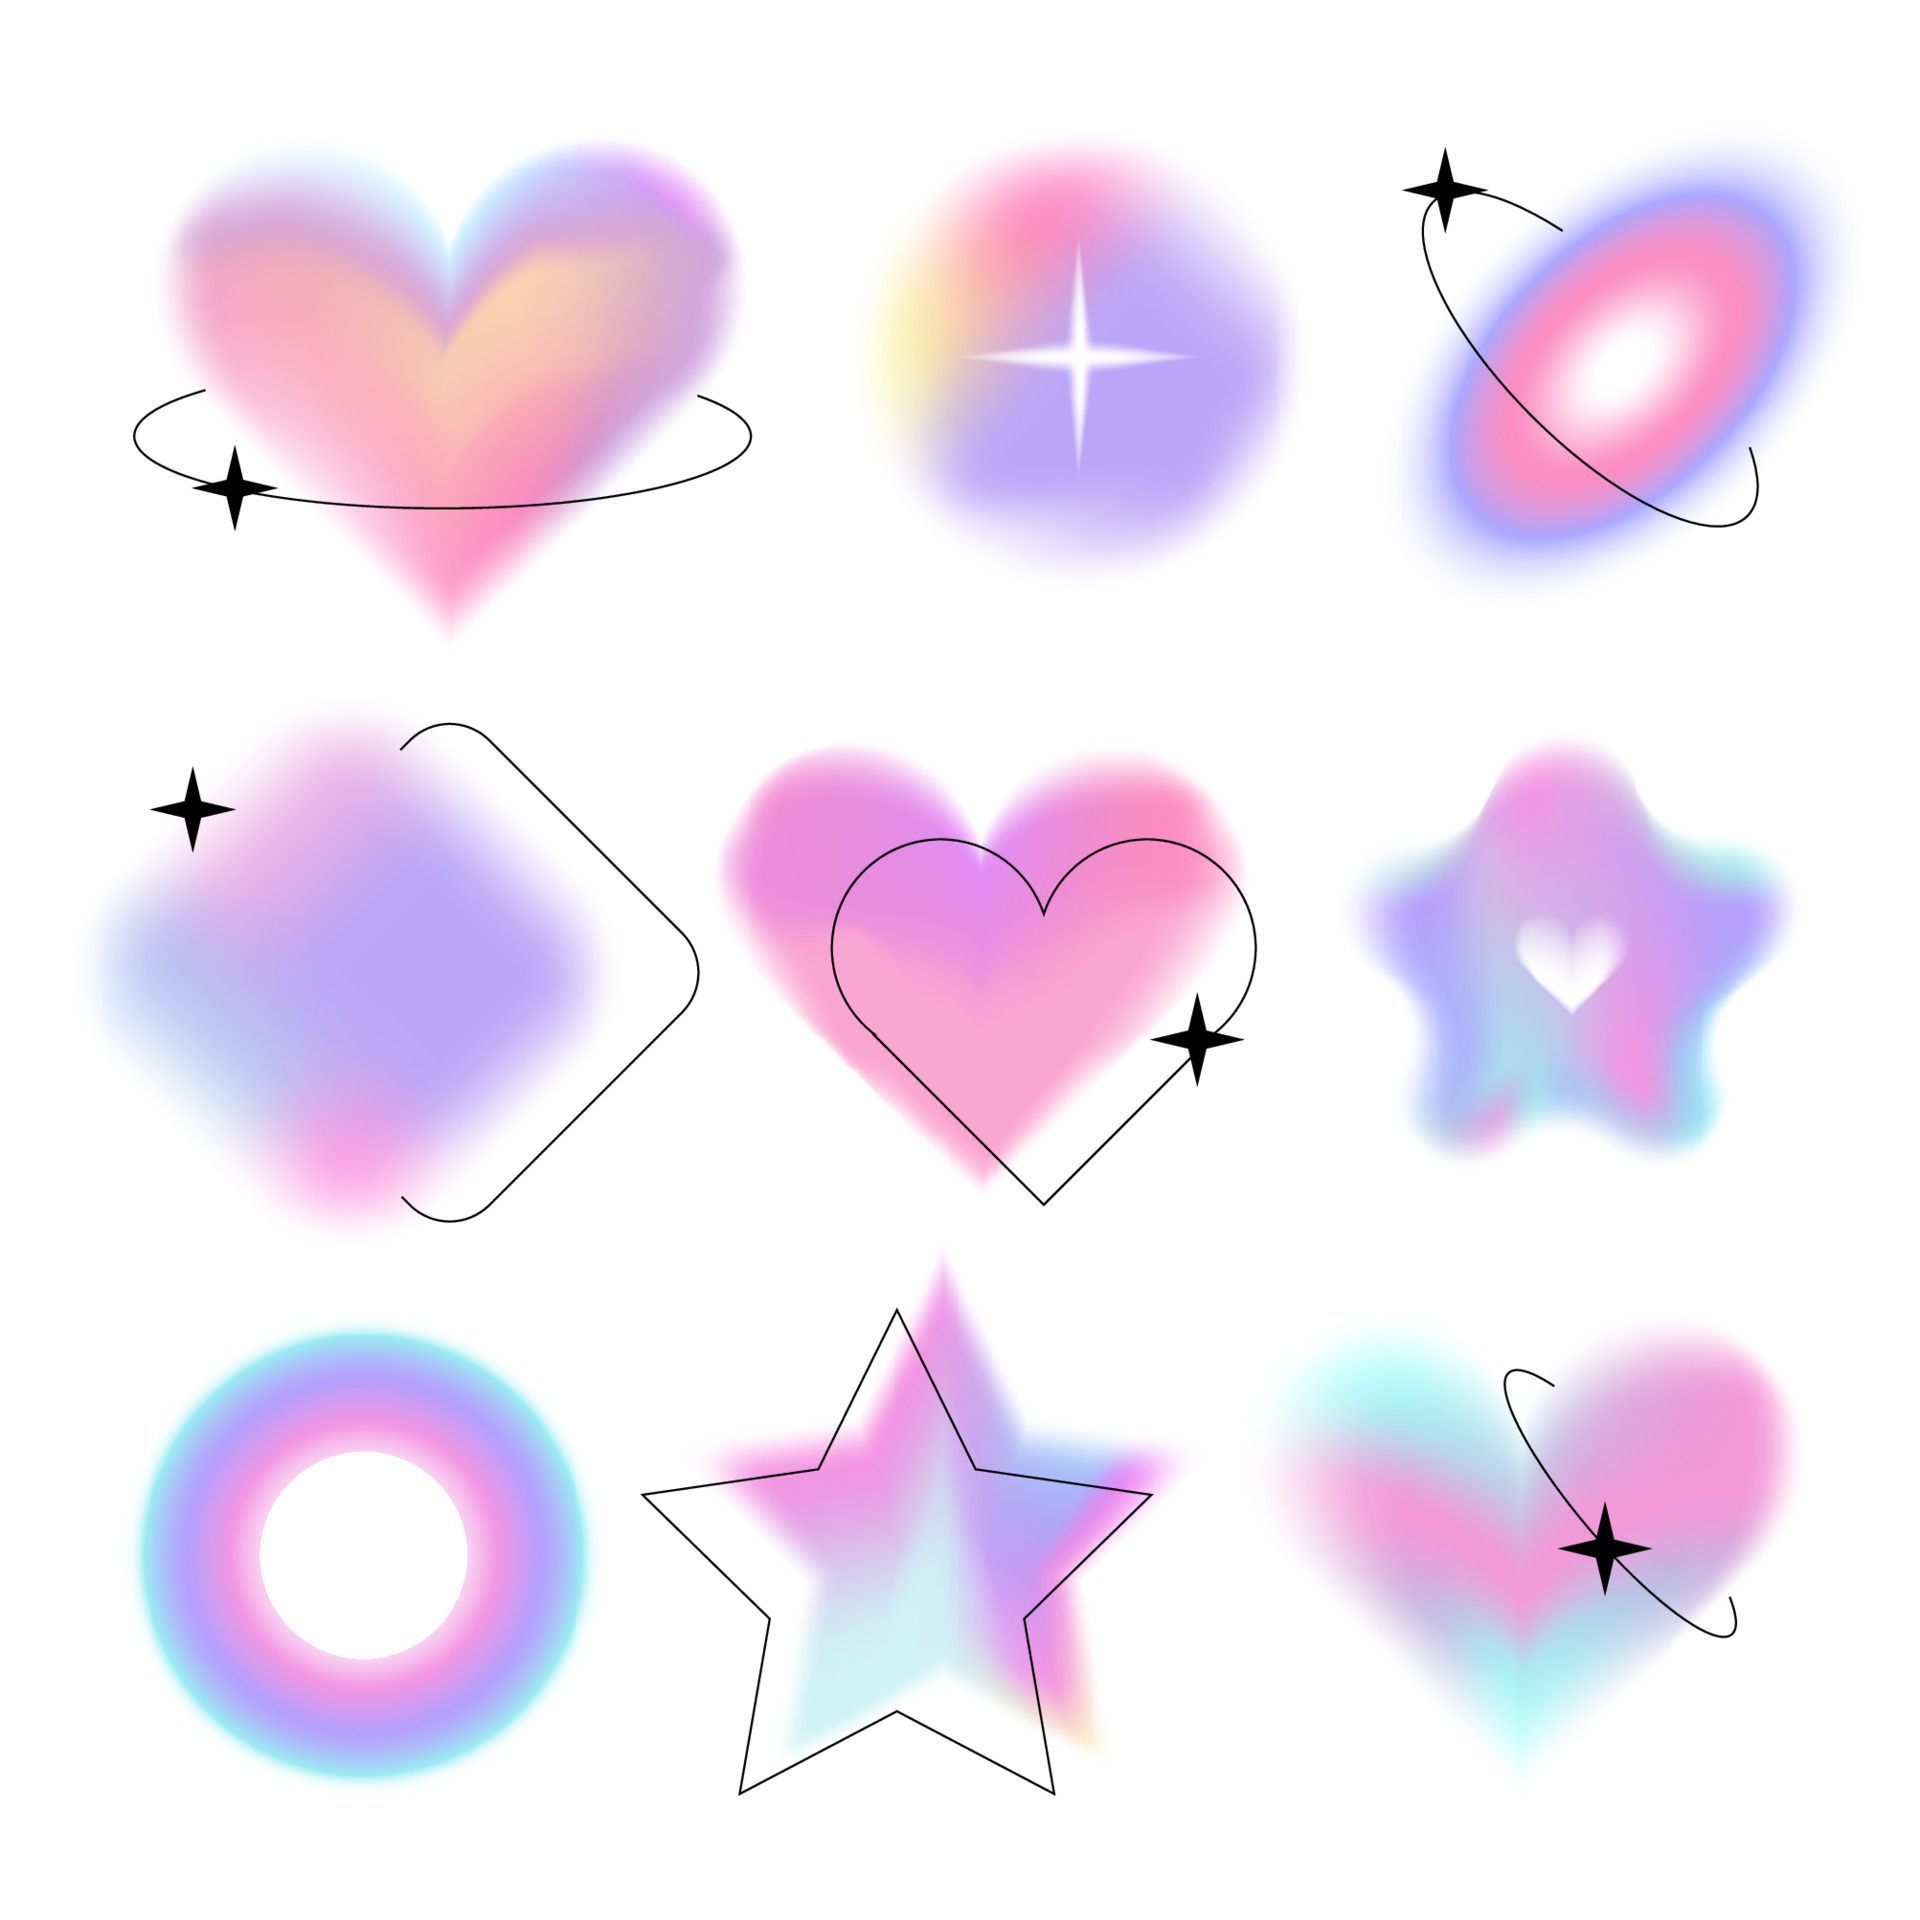 Abstract blurred gradient shapes set, blurry star, ring, heart aura aesthetic elements collection, colorful soft holo lilac gradients. Various geometric forms with blurring effect vector illustration